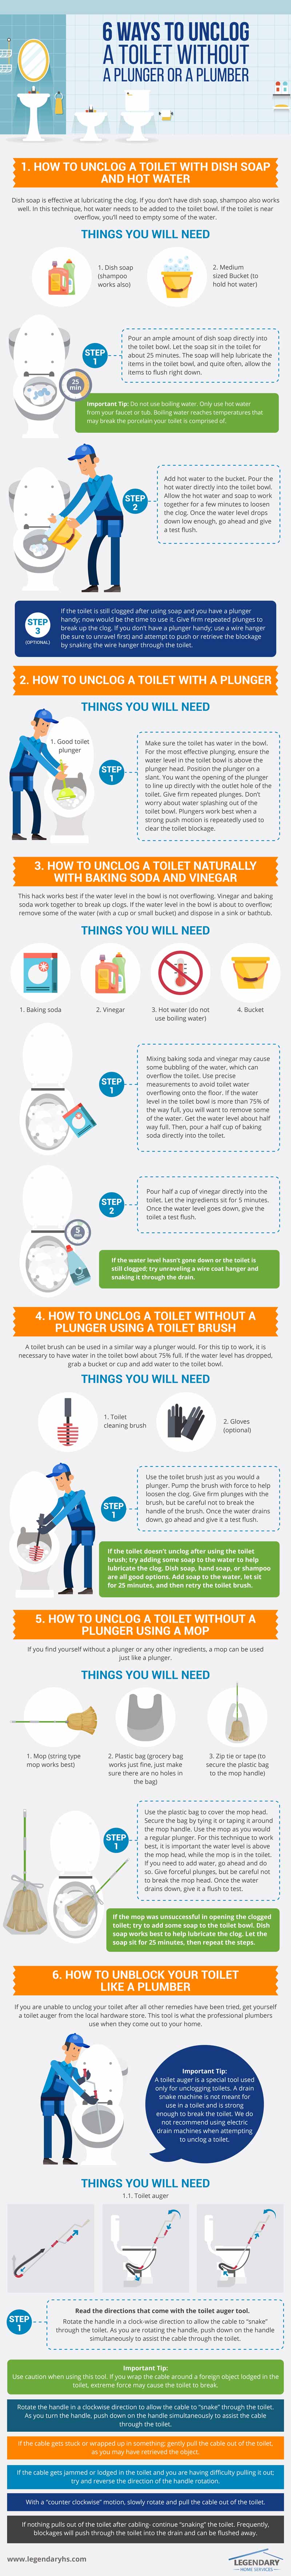 6 Ways to Unclog a Toilet Without a Plunger or a Plumber